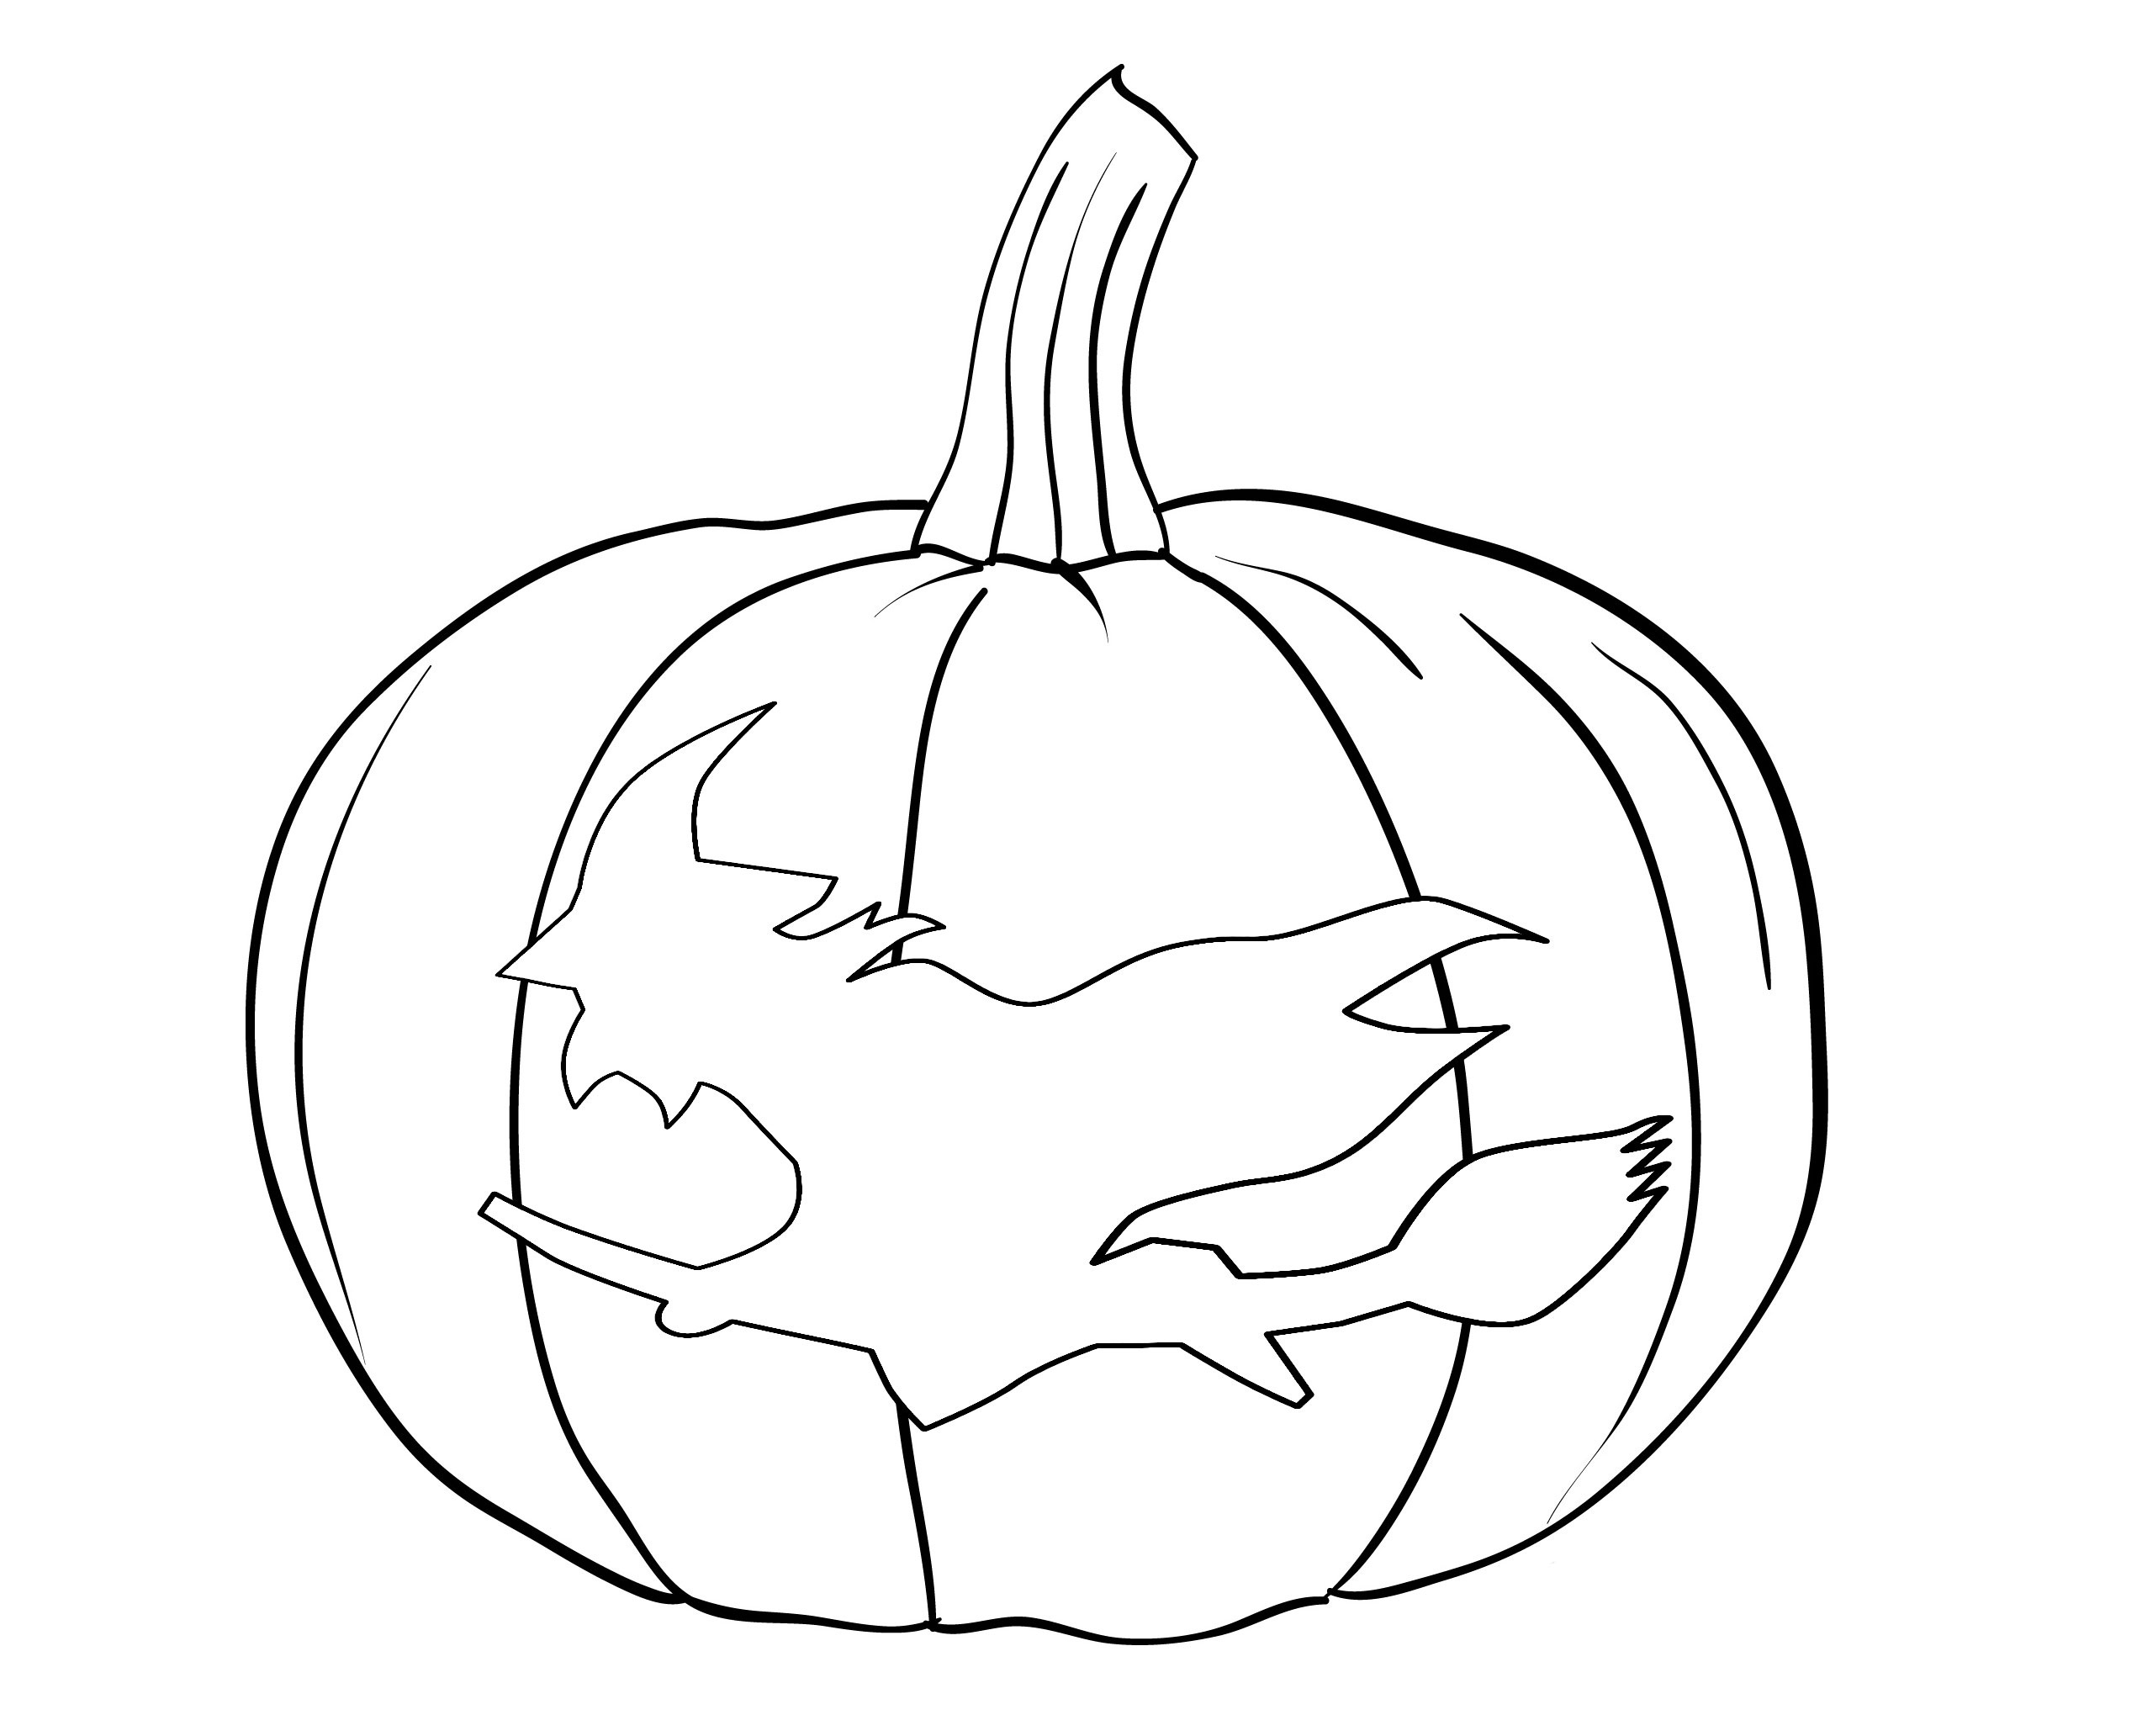 Halloween Pumpkin Coloring Pages Printables Coloring Pages Free Halloween Pumpkin Coloring Pages For Toddlers